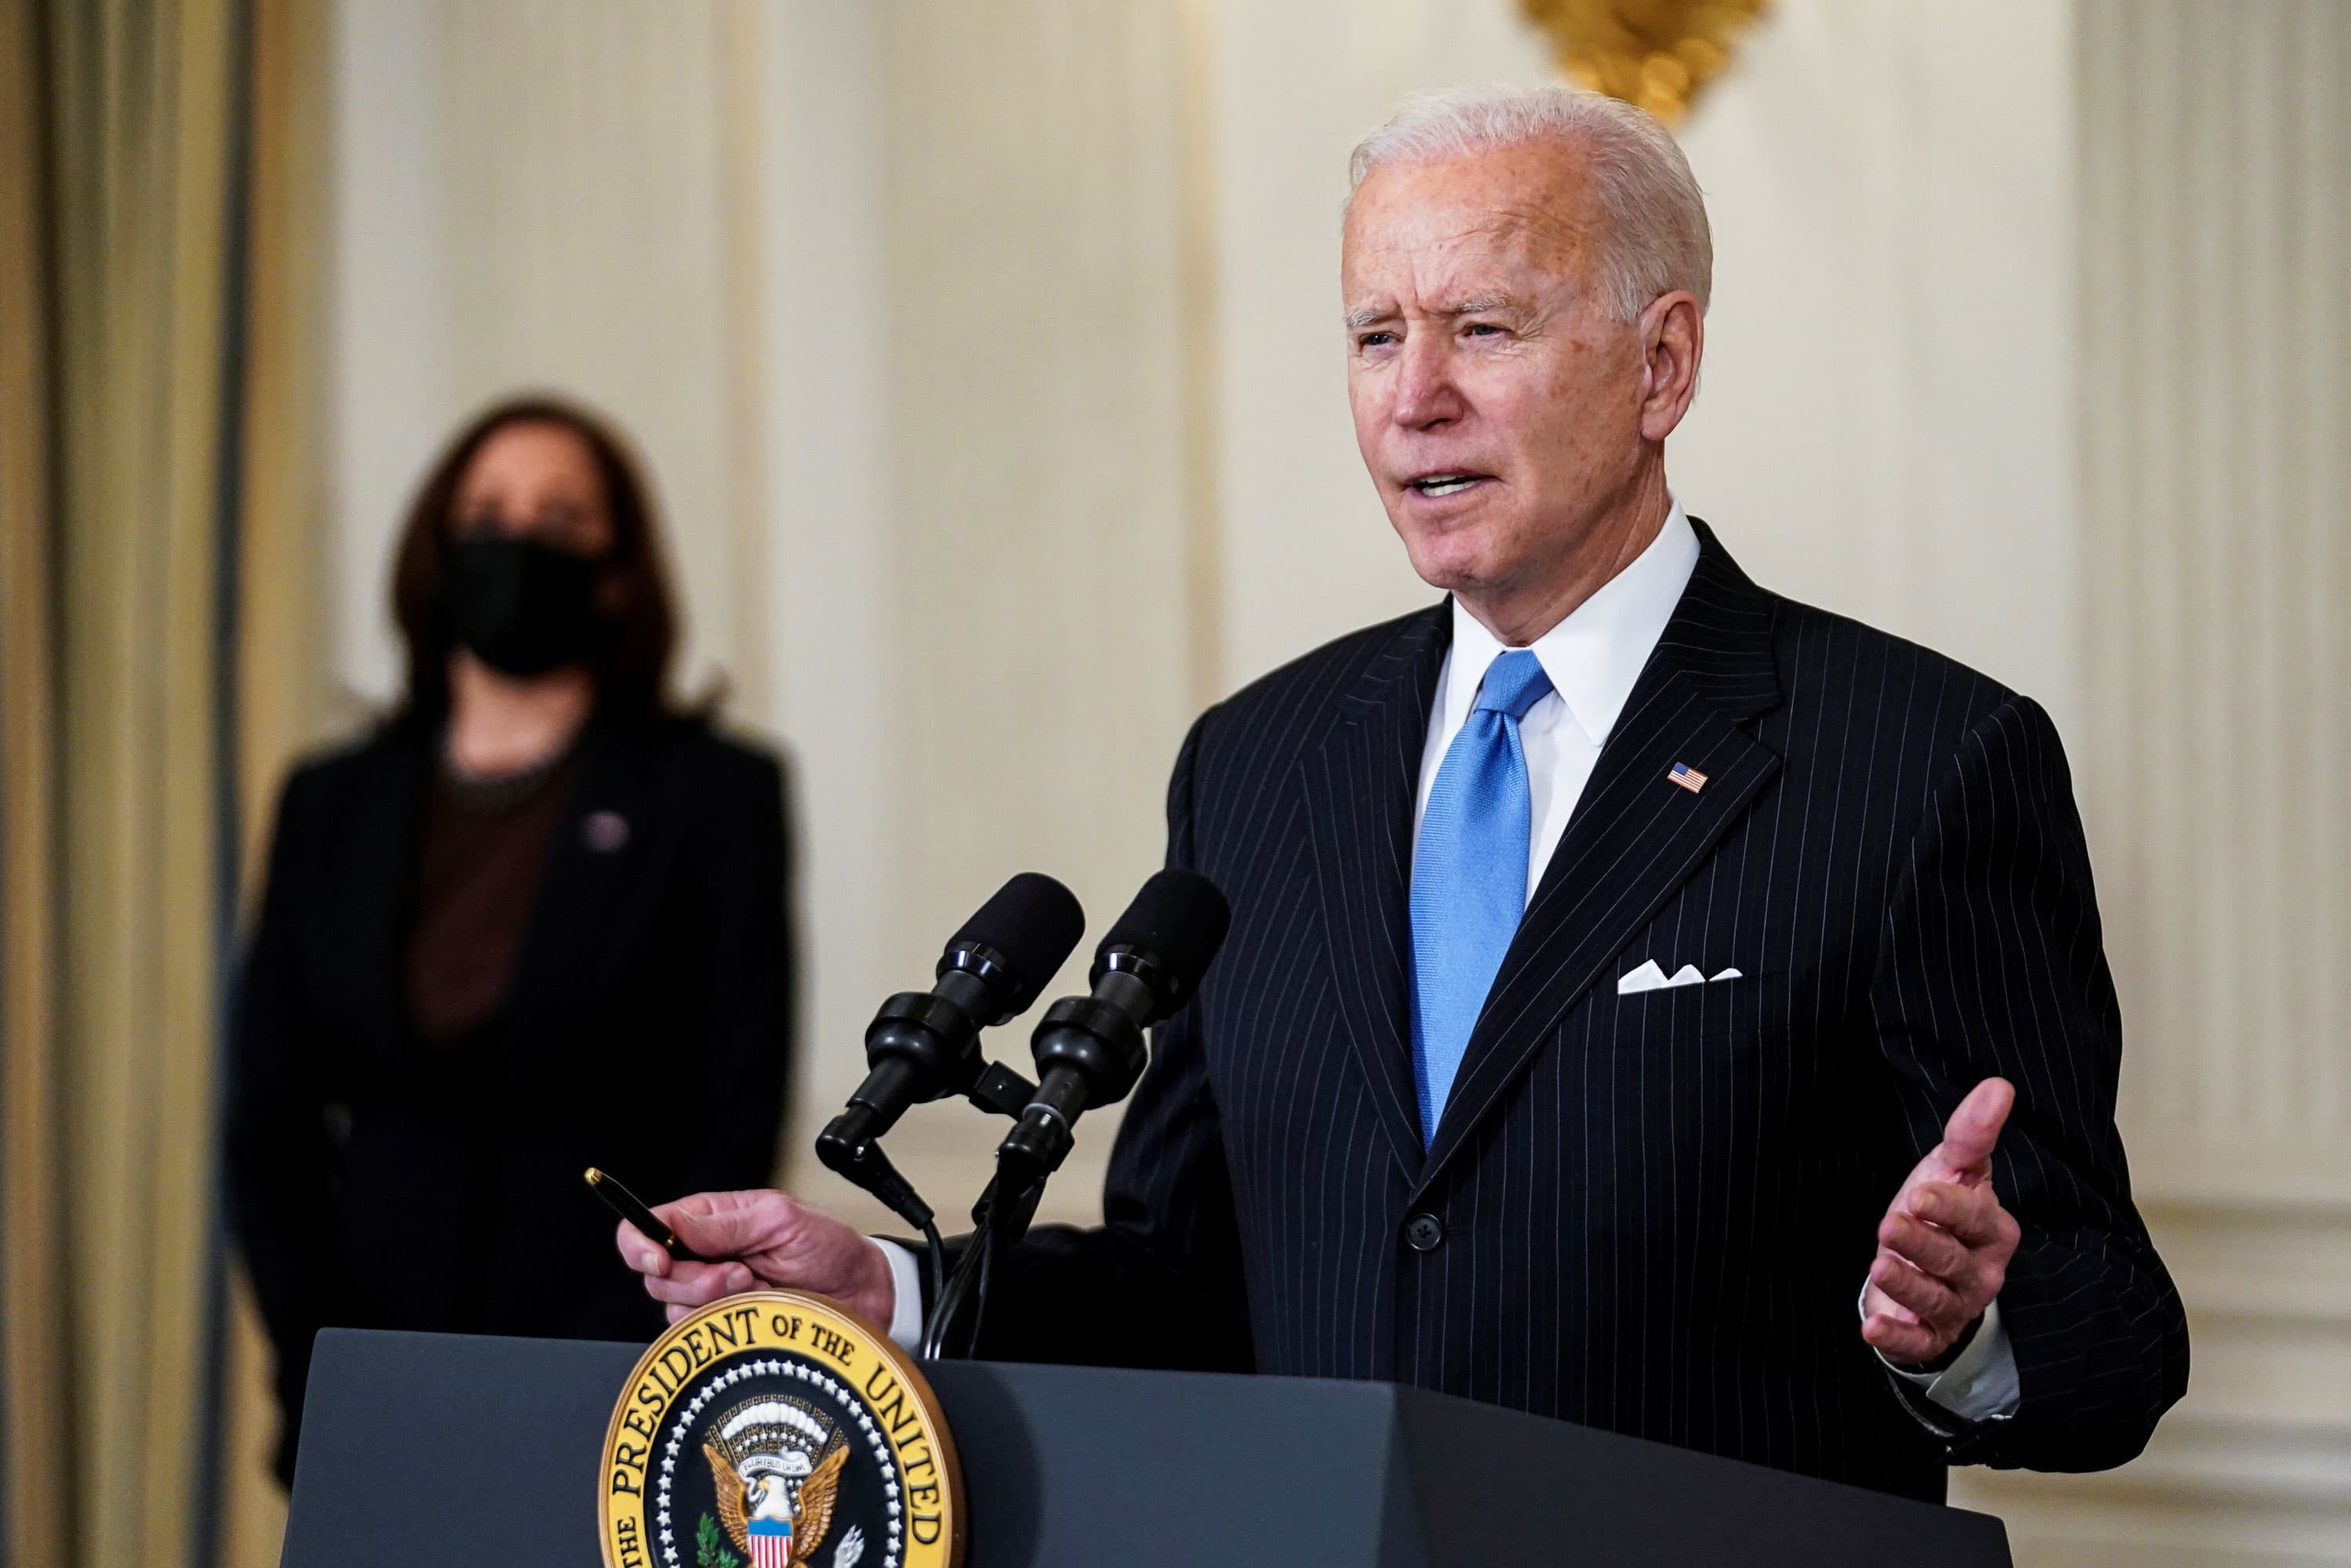 Biden willing to negotiate on corporate tax rate, but says inaction not an option on infrastructure